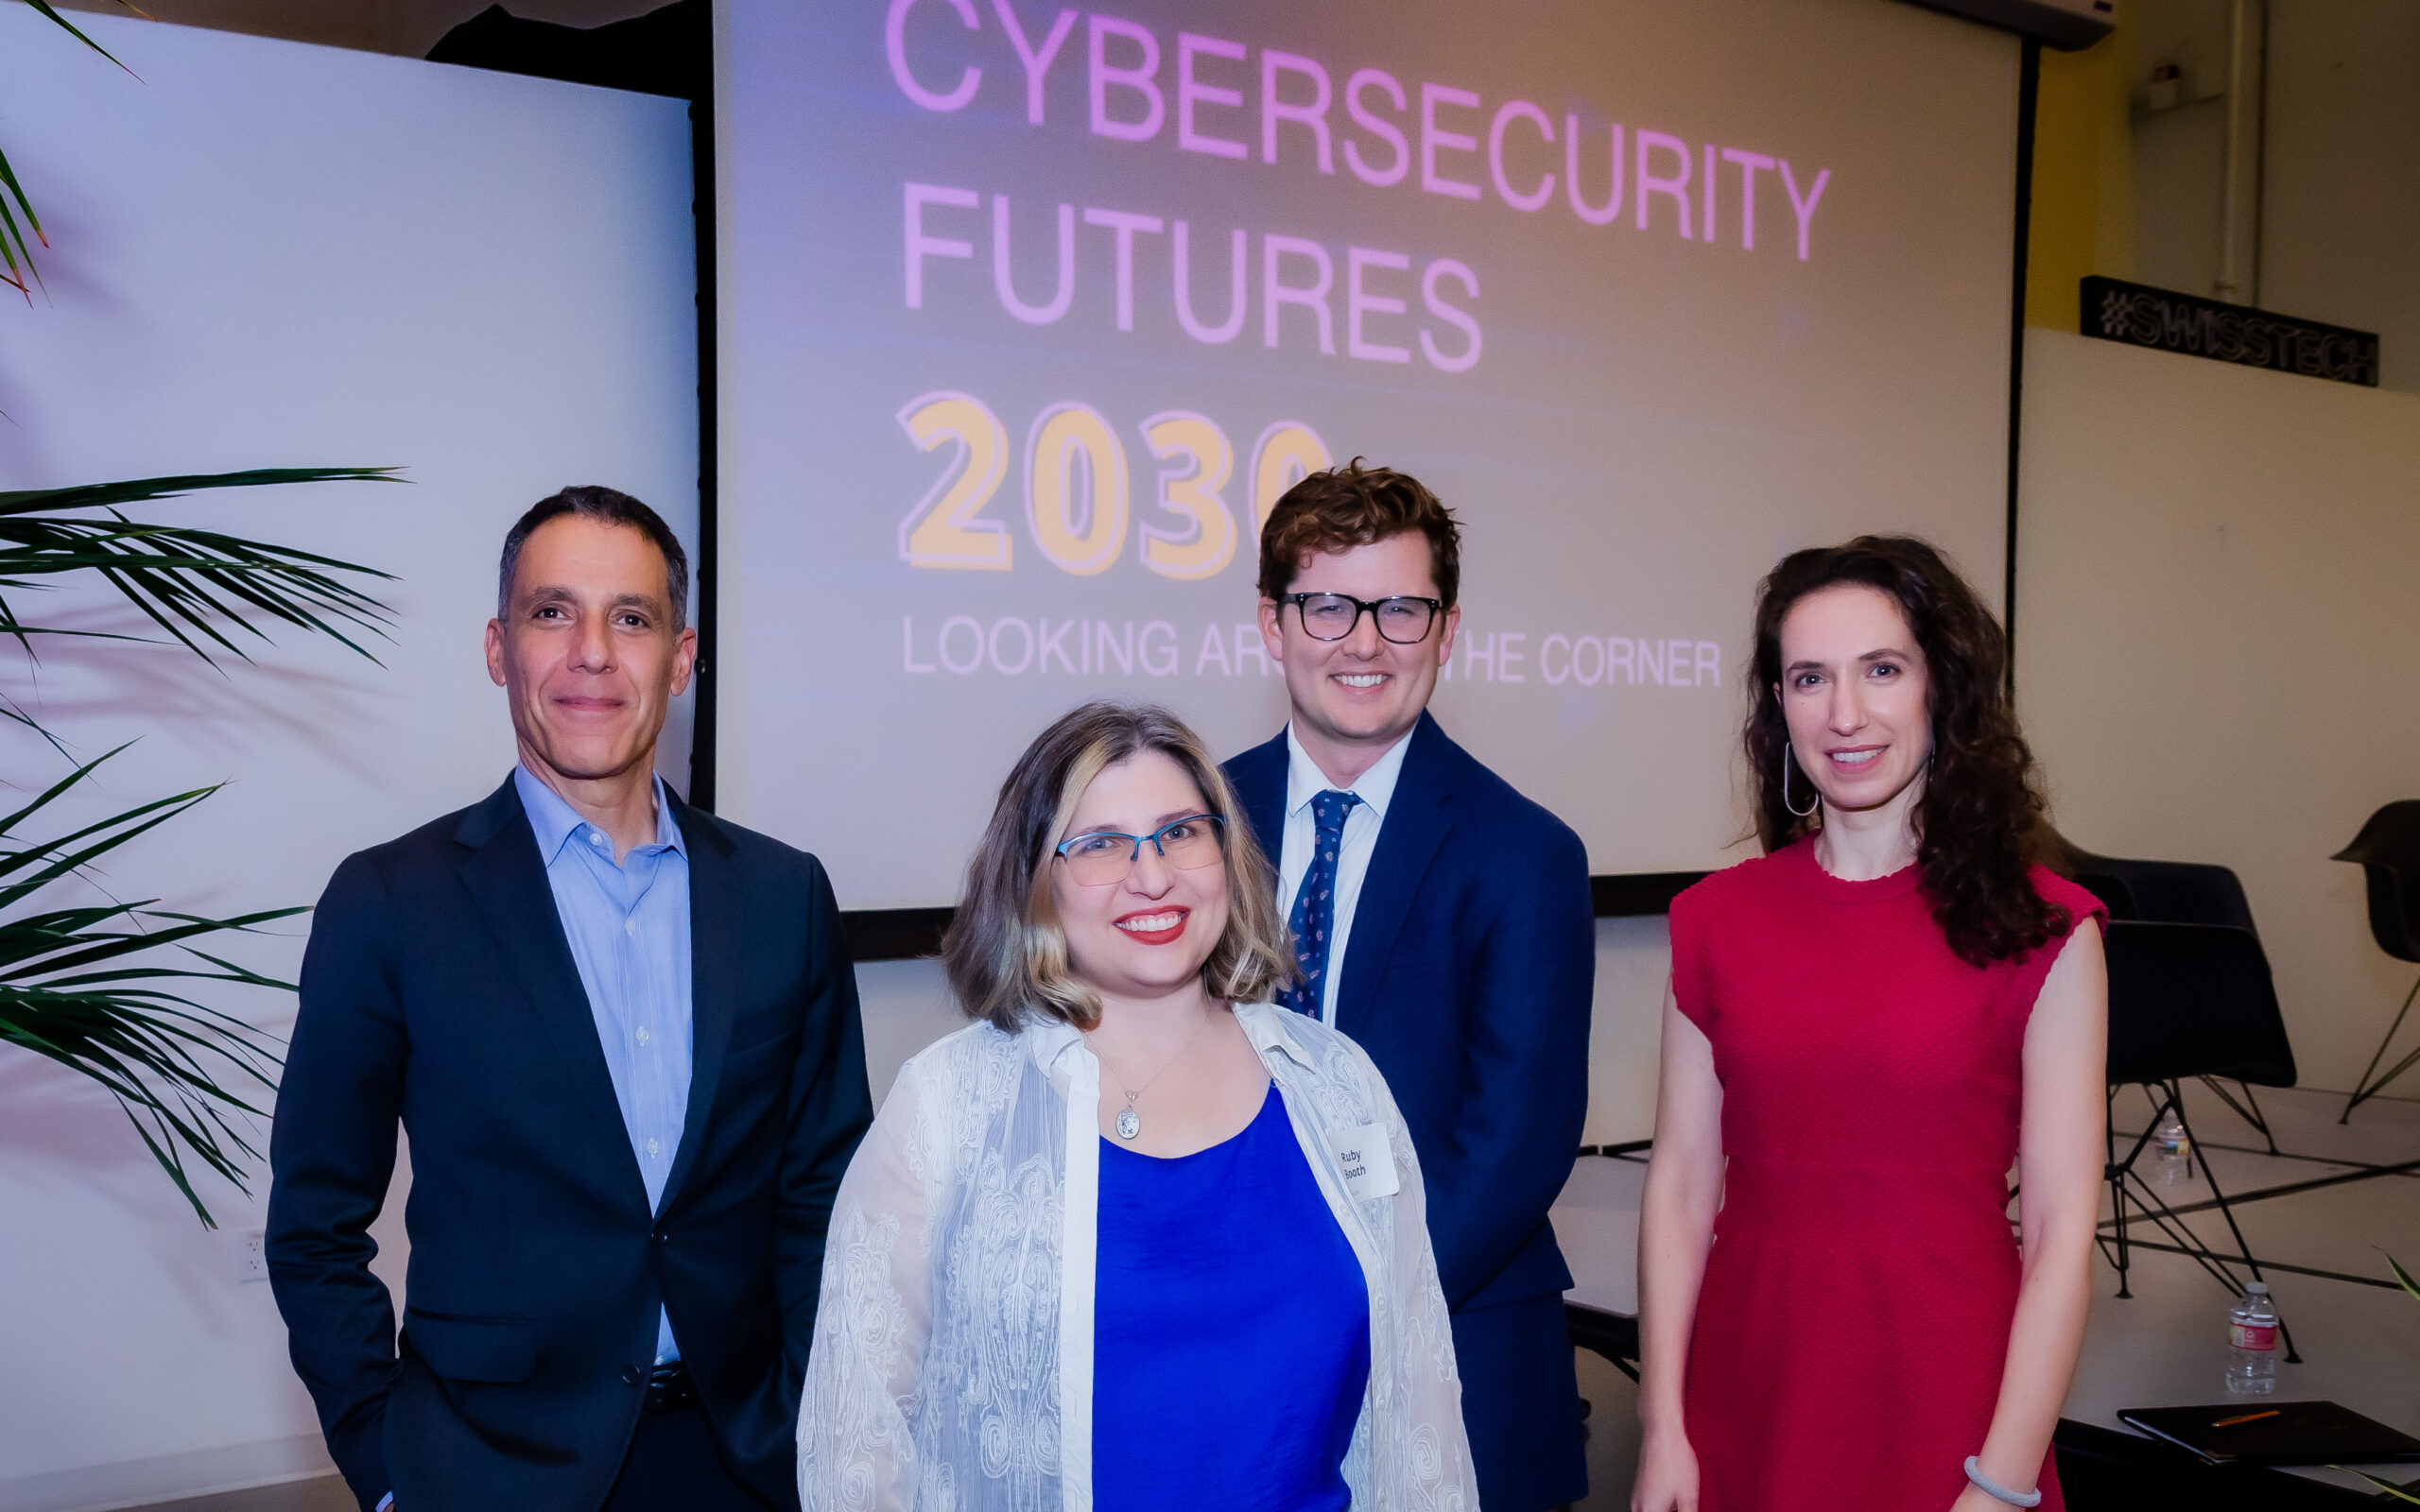 CLTC Launches “Cybersecurity Futures 2030” with Special Kickoff Event